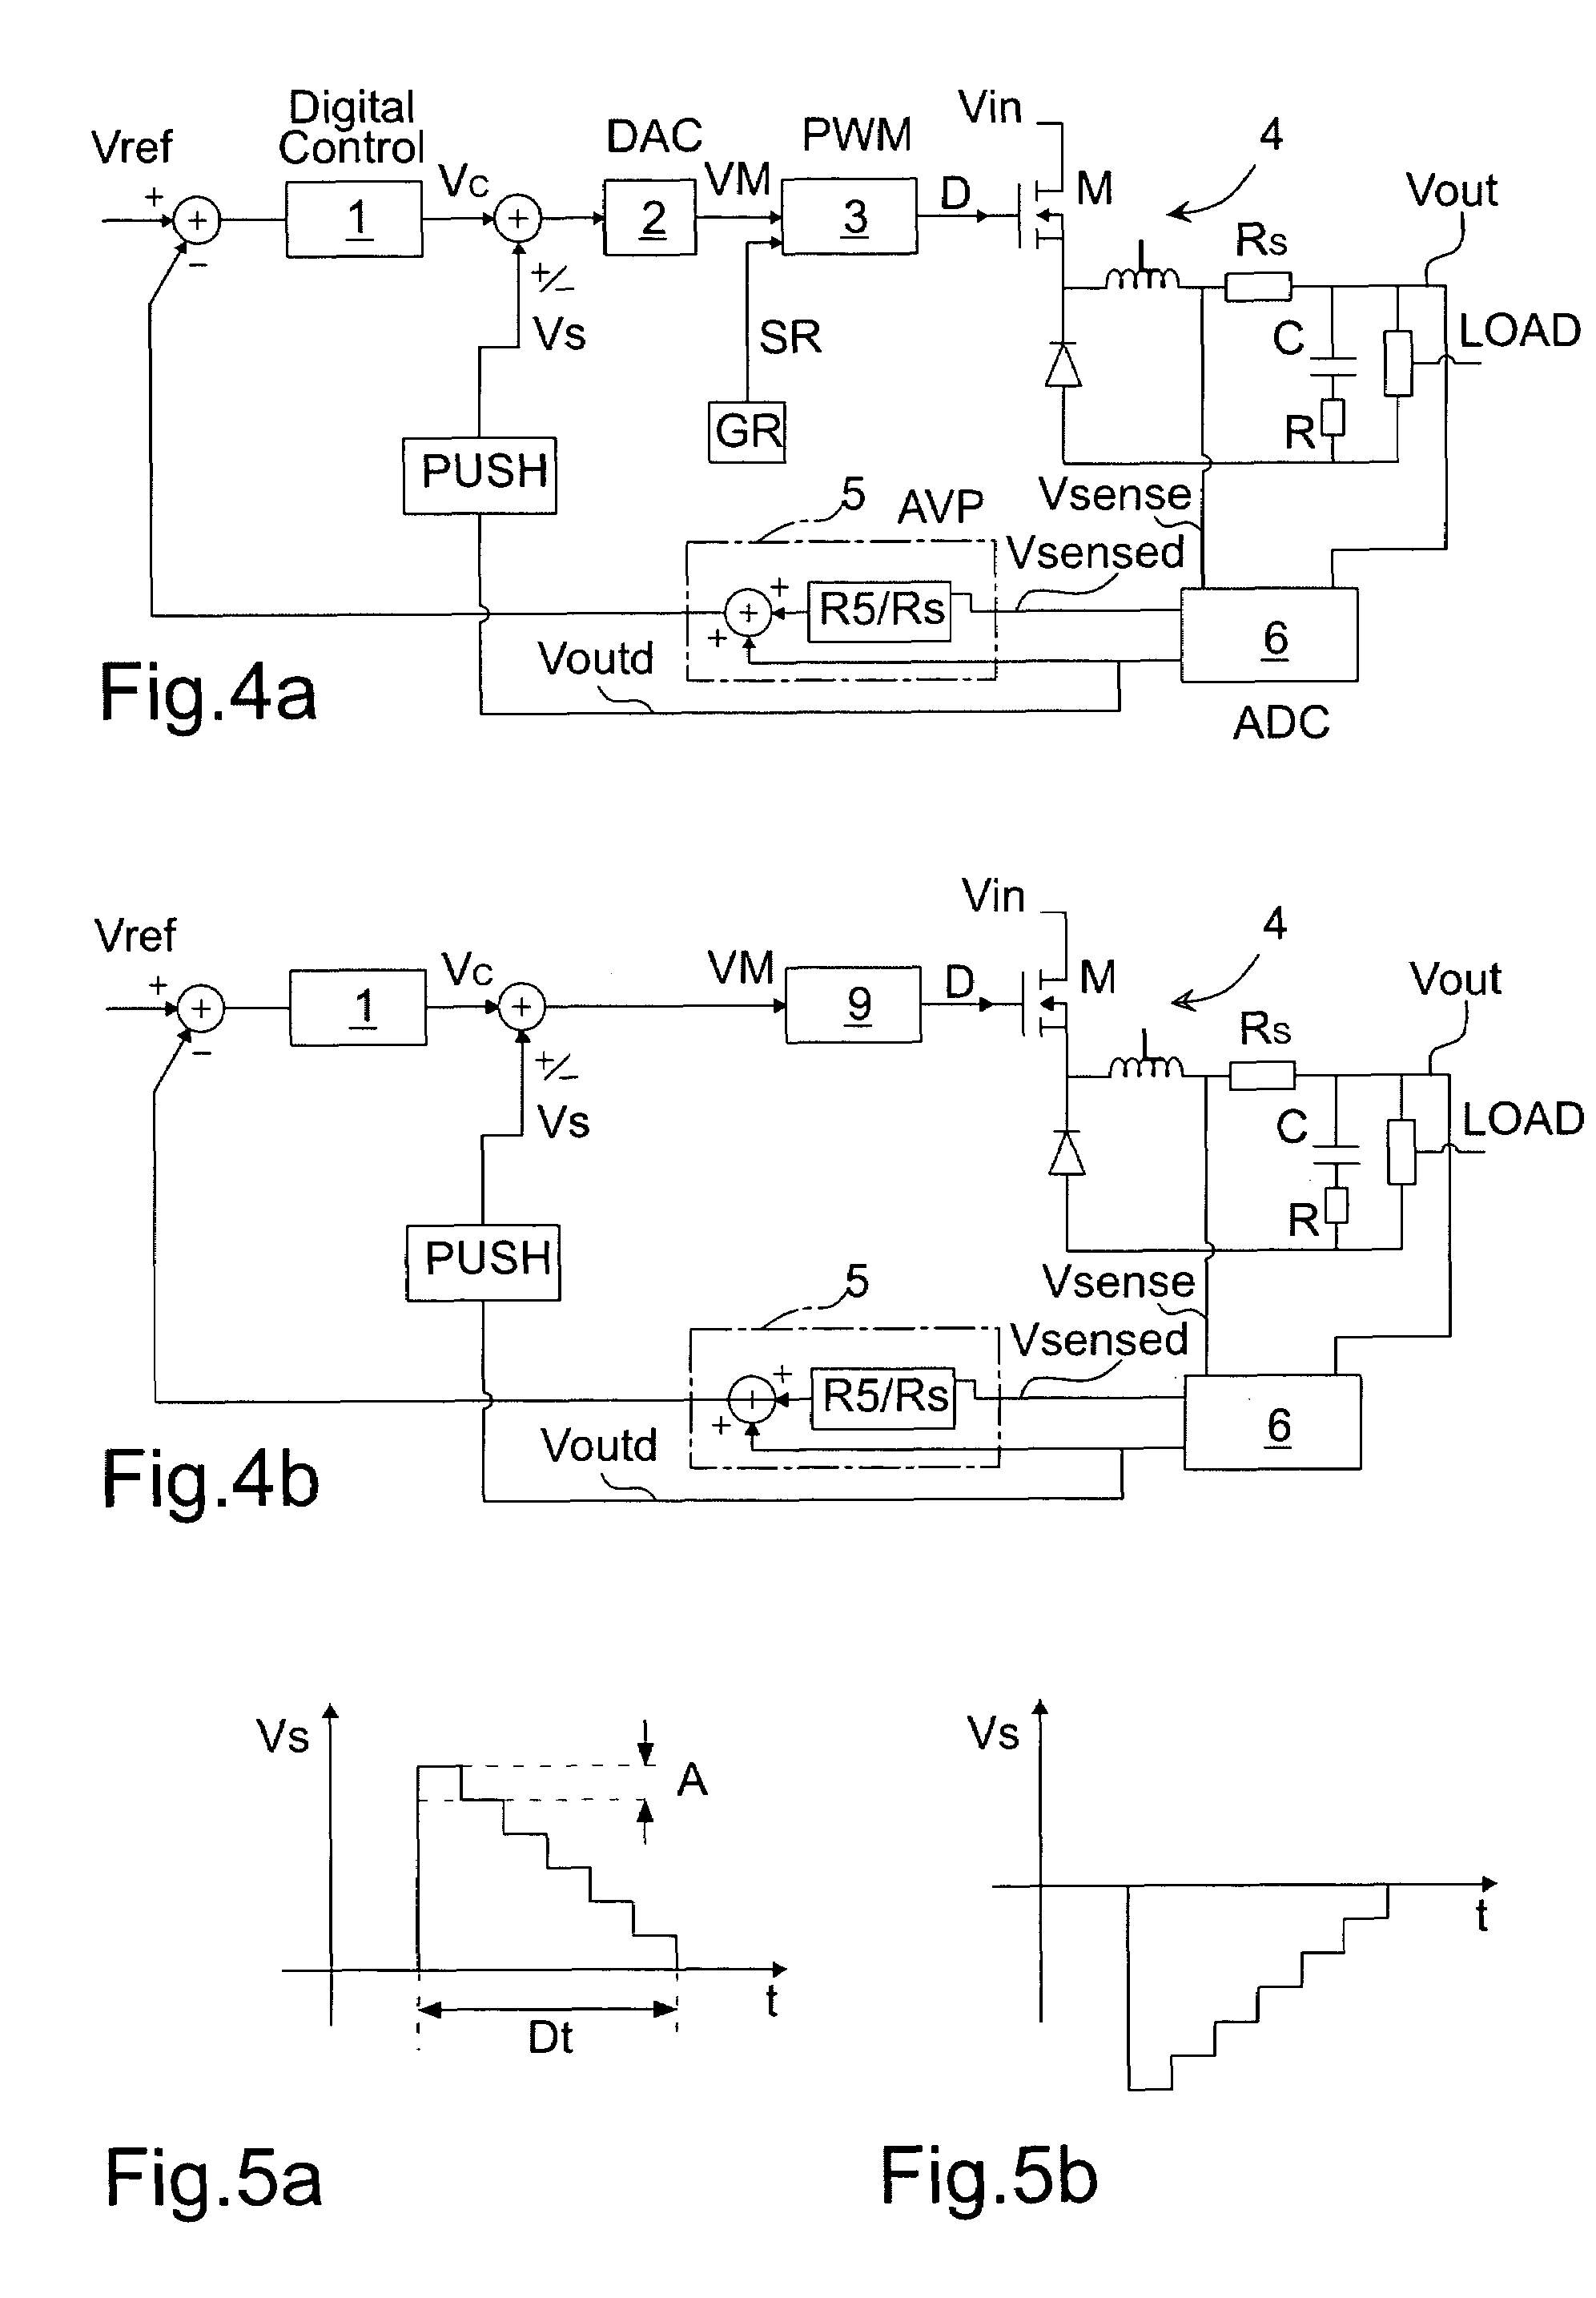 Digital control apparatus for a switching DC-DC converter